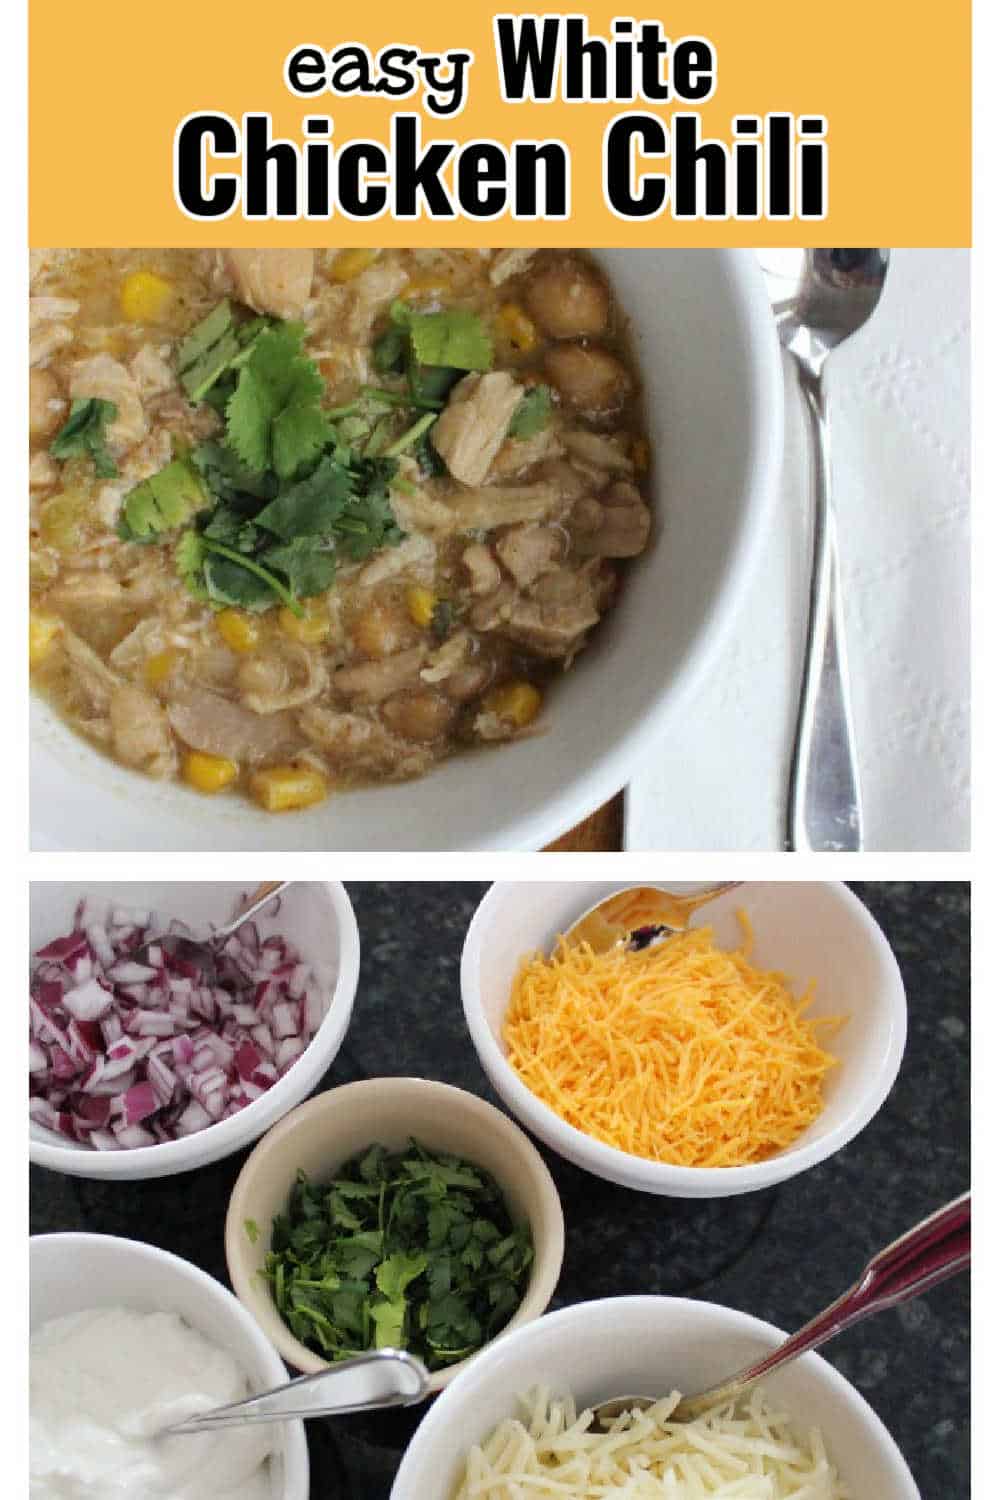 white chicken chili in a white bowl.  Second image shows topping that include chopped onions, grated cheddar cheese, cilantro and sour cream.